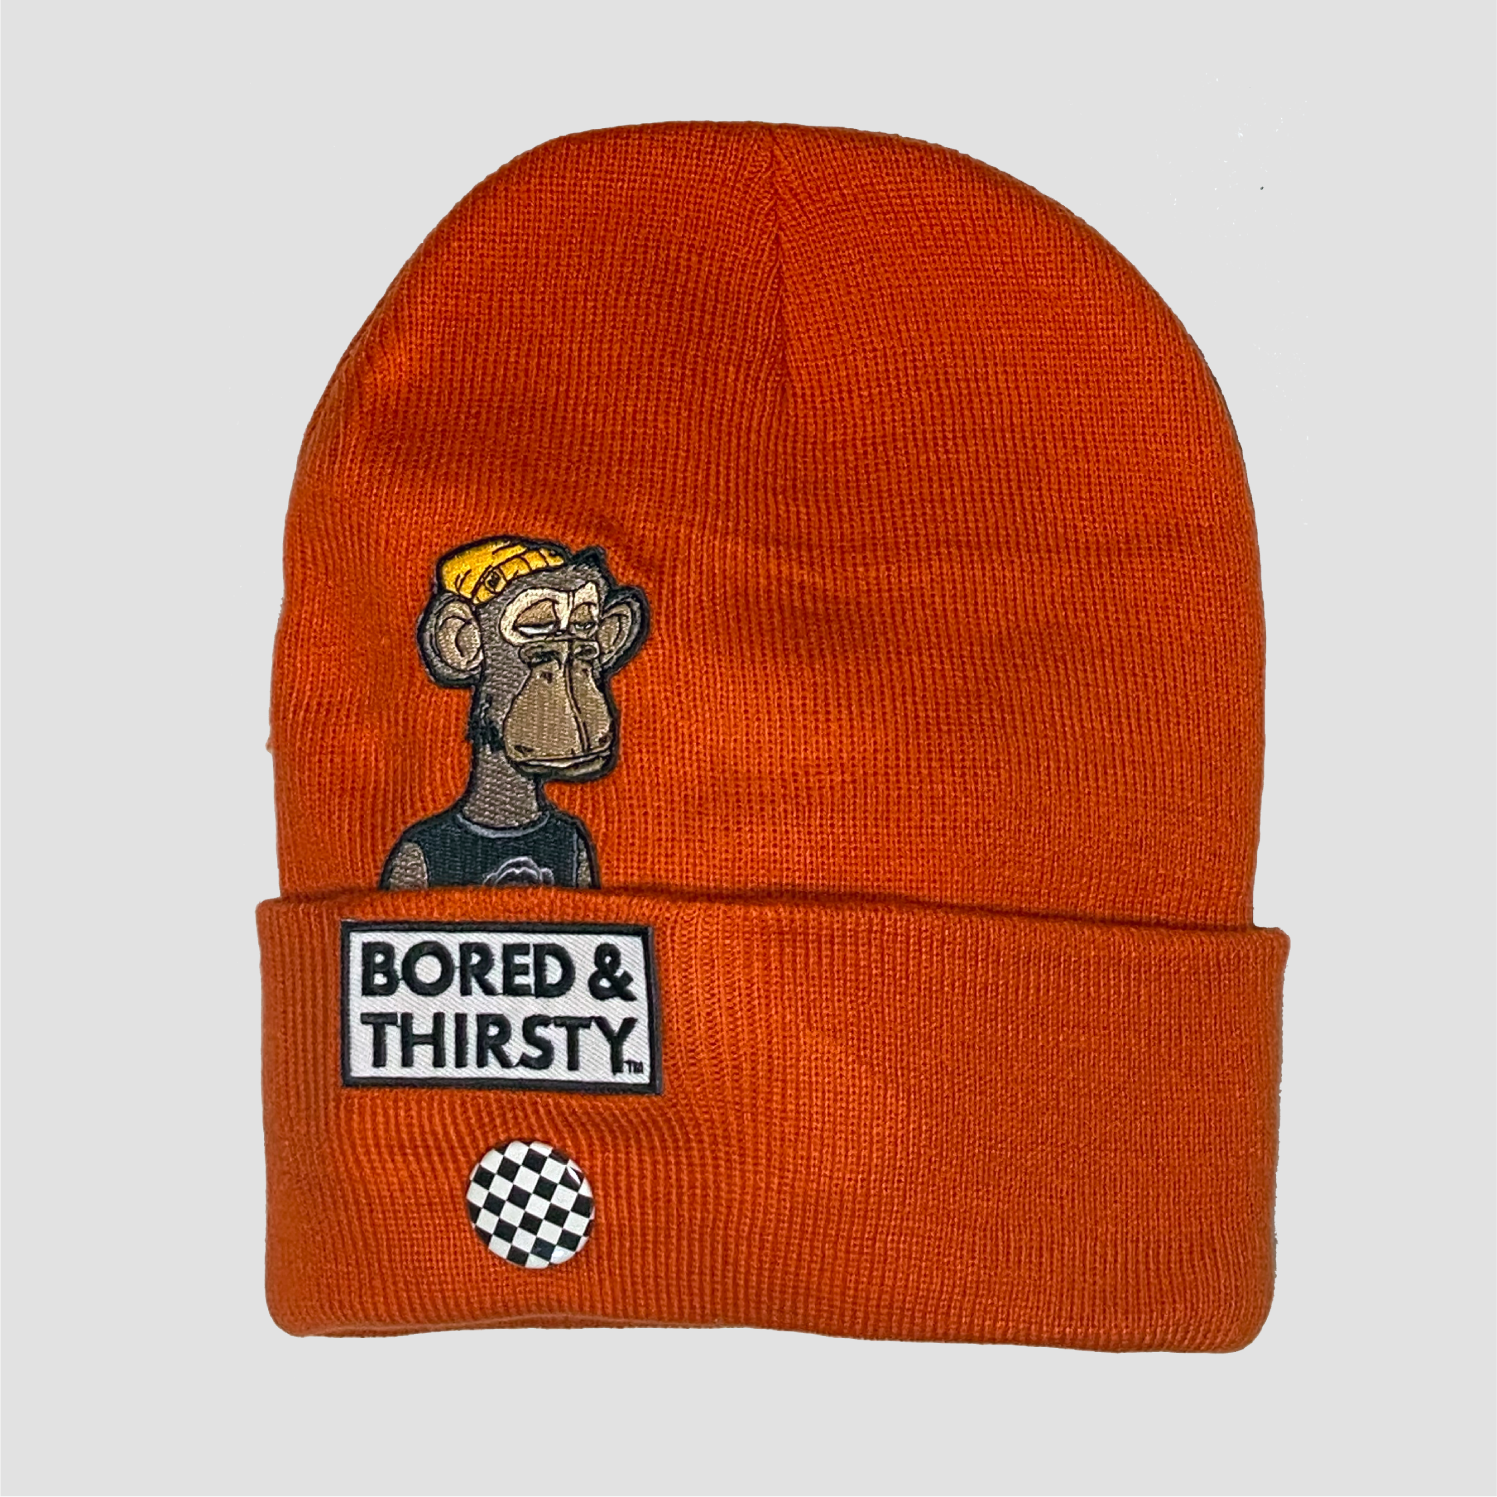 Our clockwork orange beanie makes a bold statement that you are unabashedly Thirsty For Life!